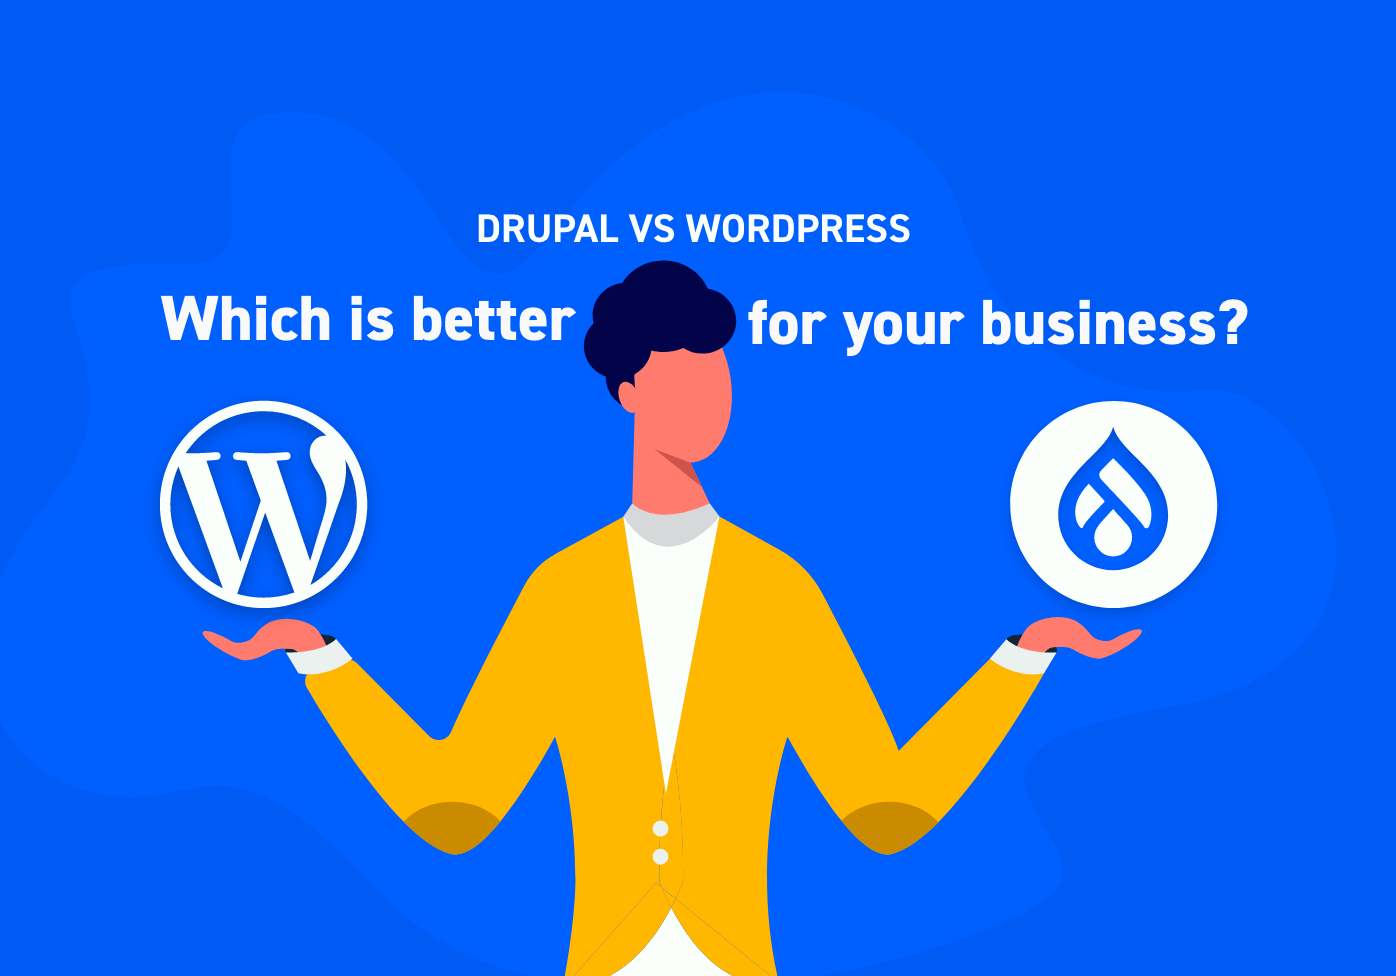 Drupal vs. WordPress: Why Most Are Making the Switch